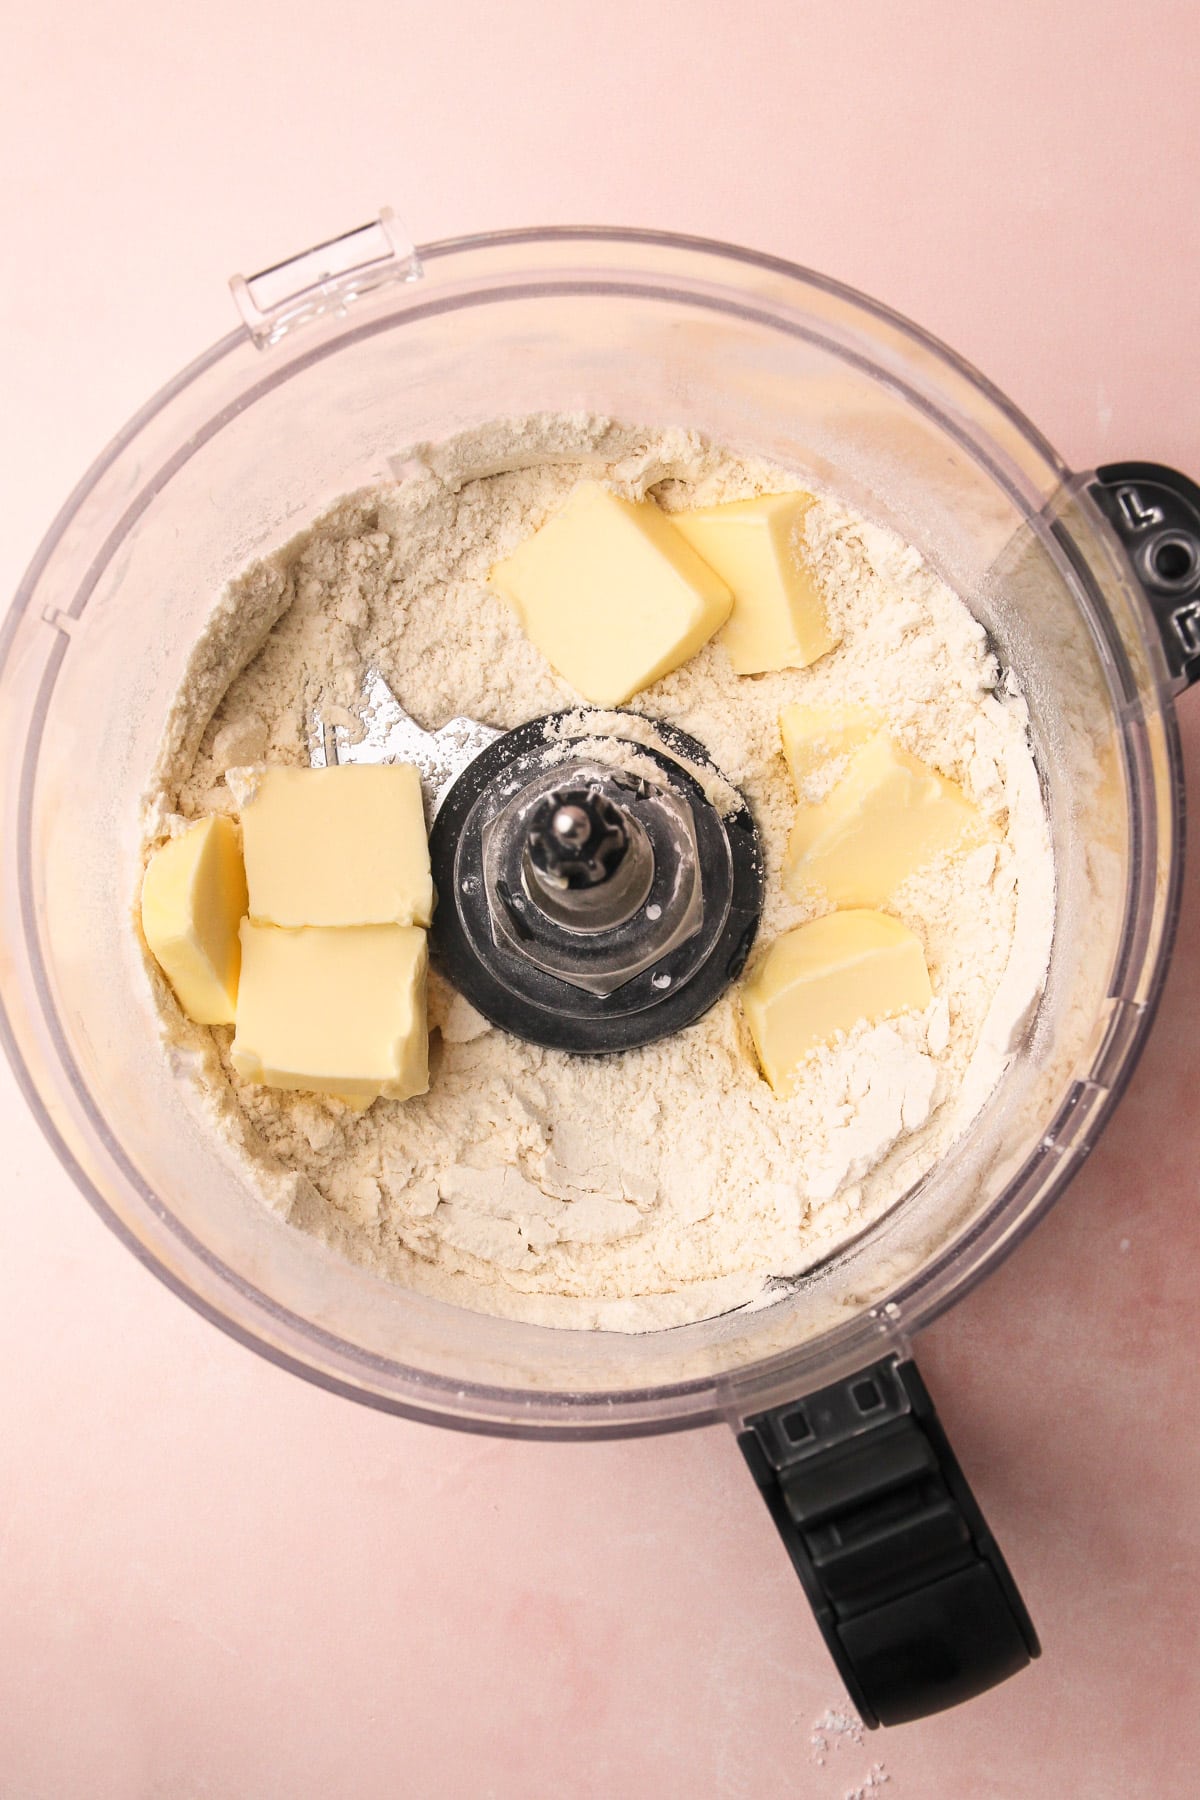 Ingredients for pate sablee in a food processor.